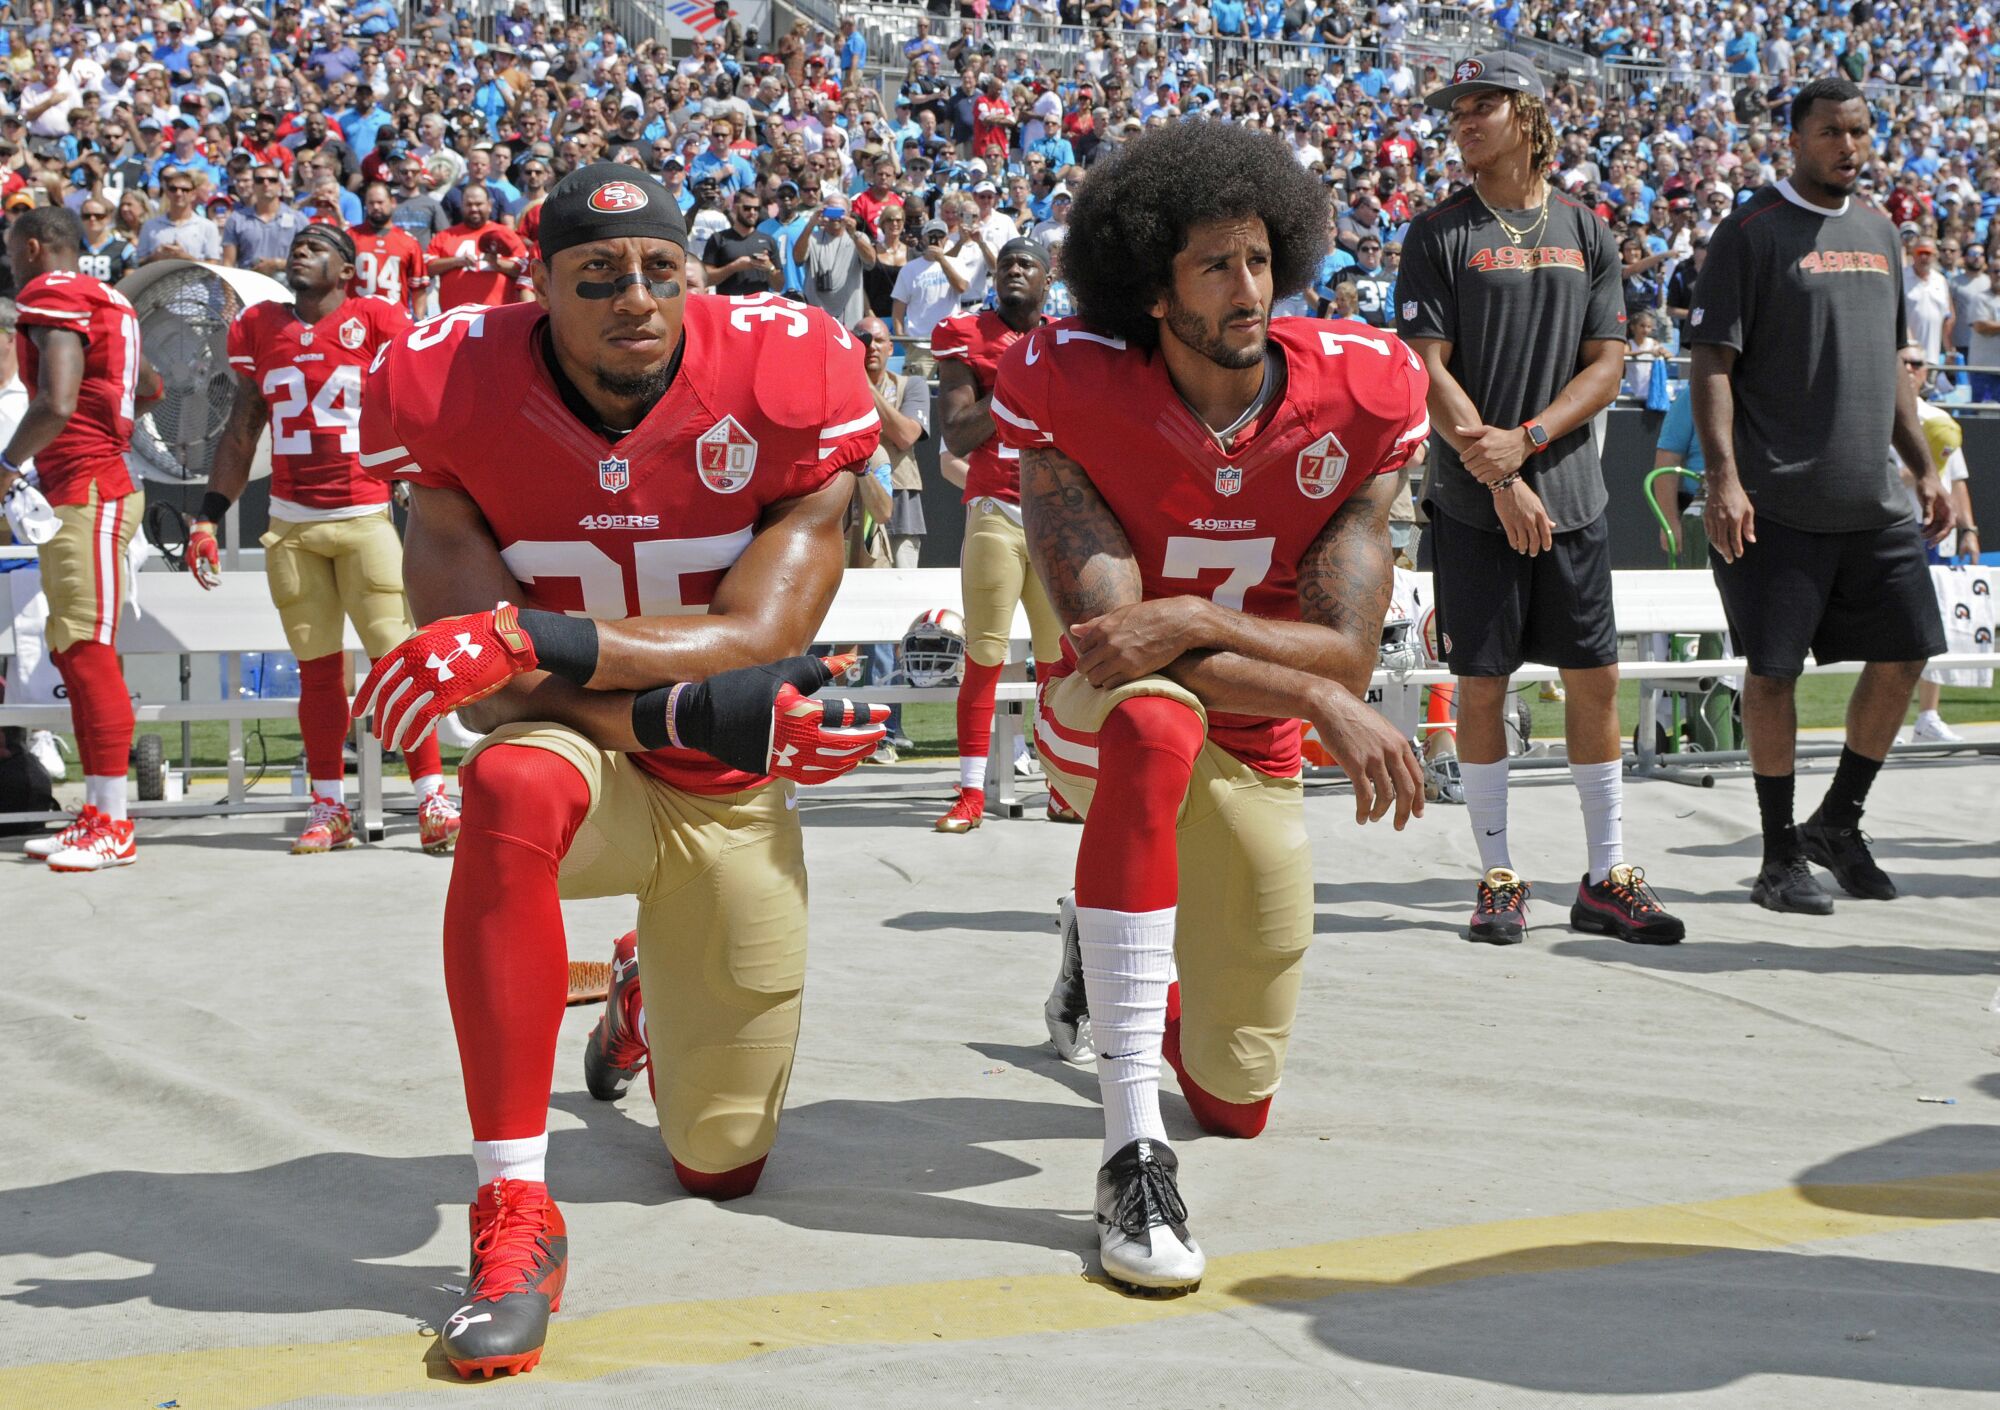 San Francisco 49ers players Colin Kaepernick, right, and Eric Reid kneel during the national anthem.